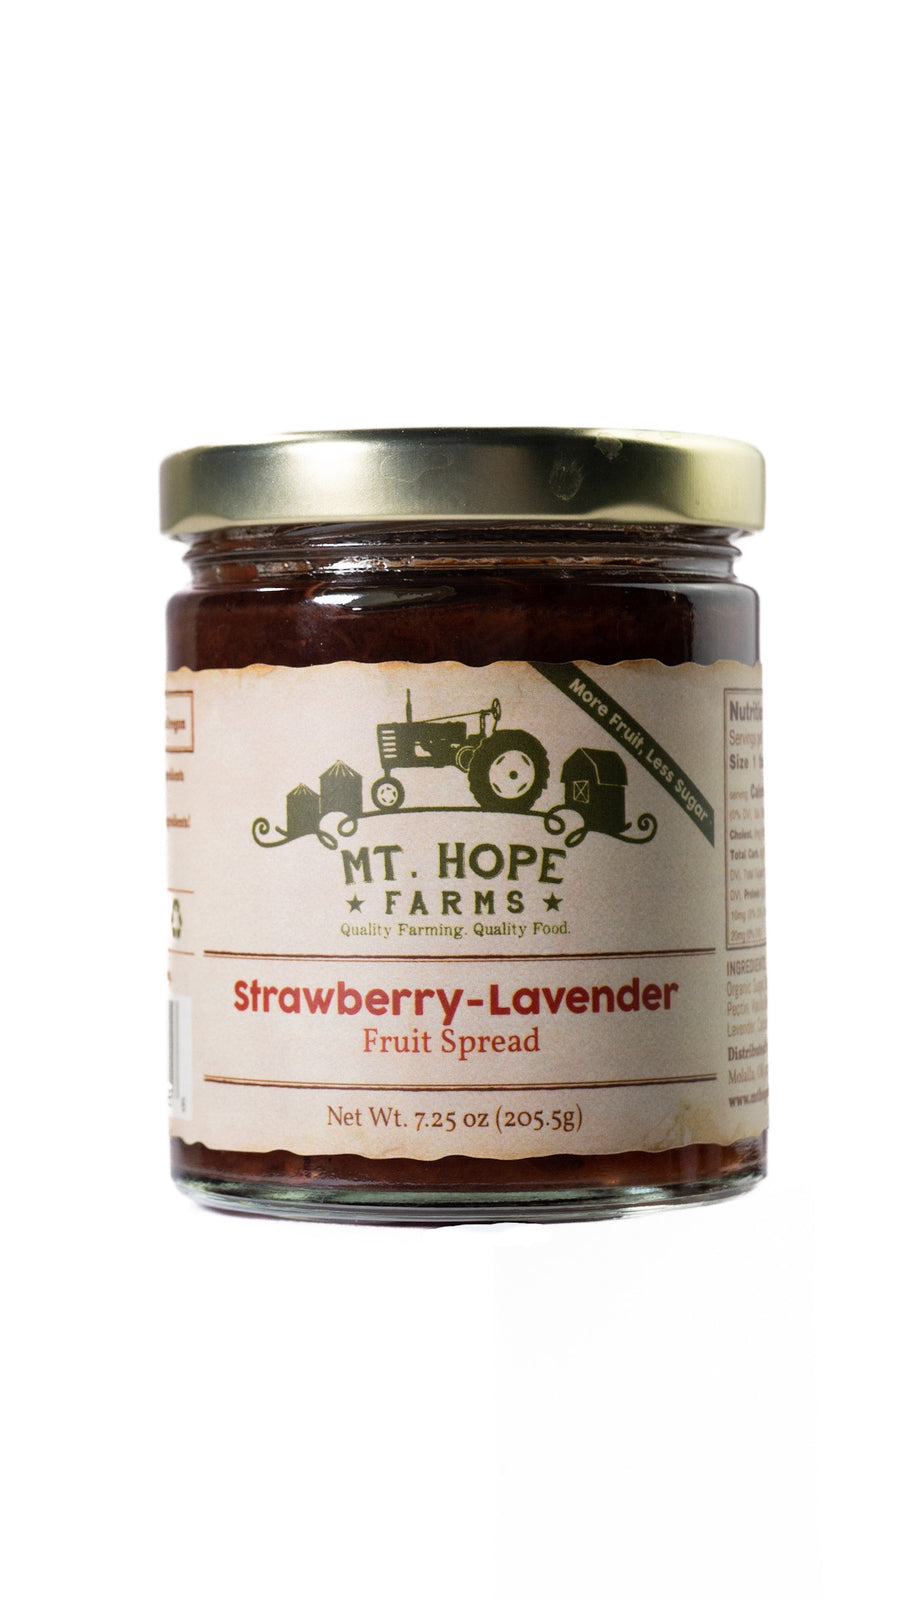 Strawberry-Lavender Fruit Spread by Mt. Hope Farms